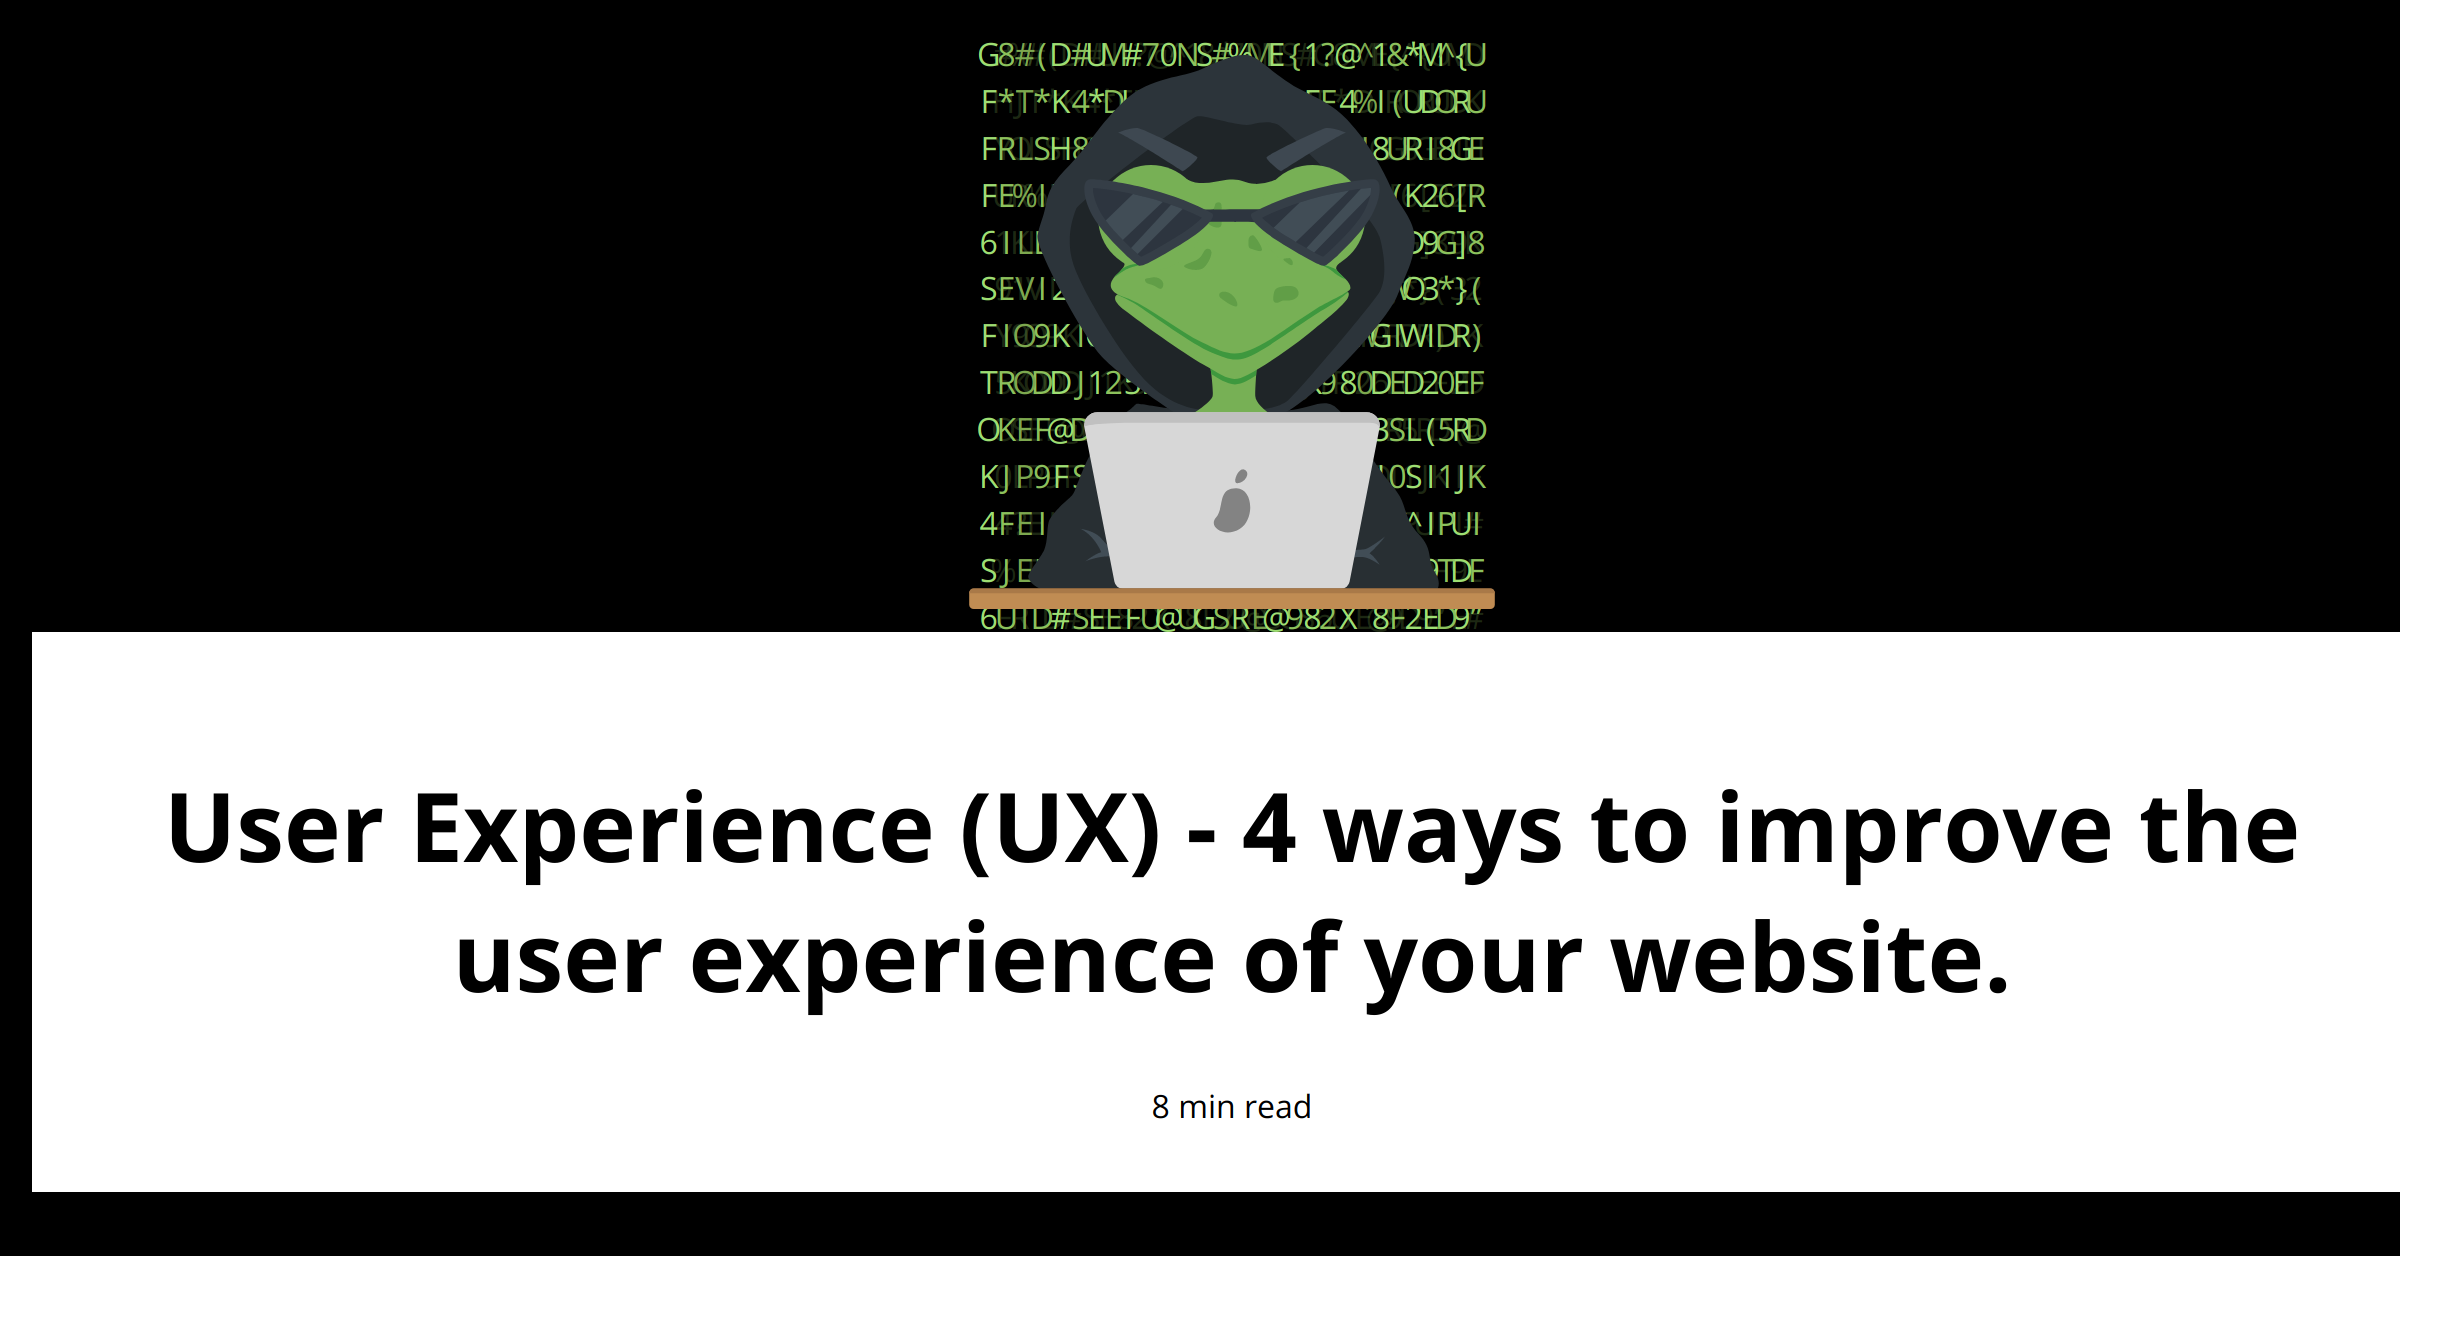 User Experience (UX) - 4 ways to improve the user experience of your website.